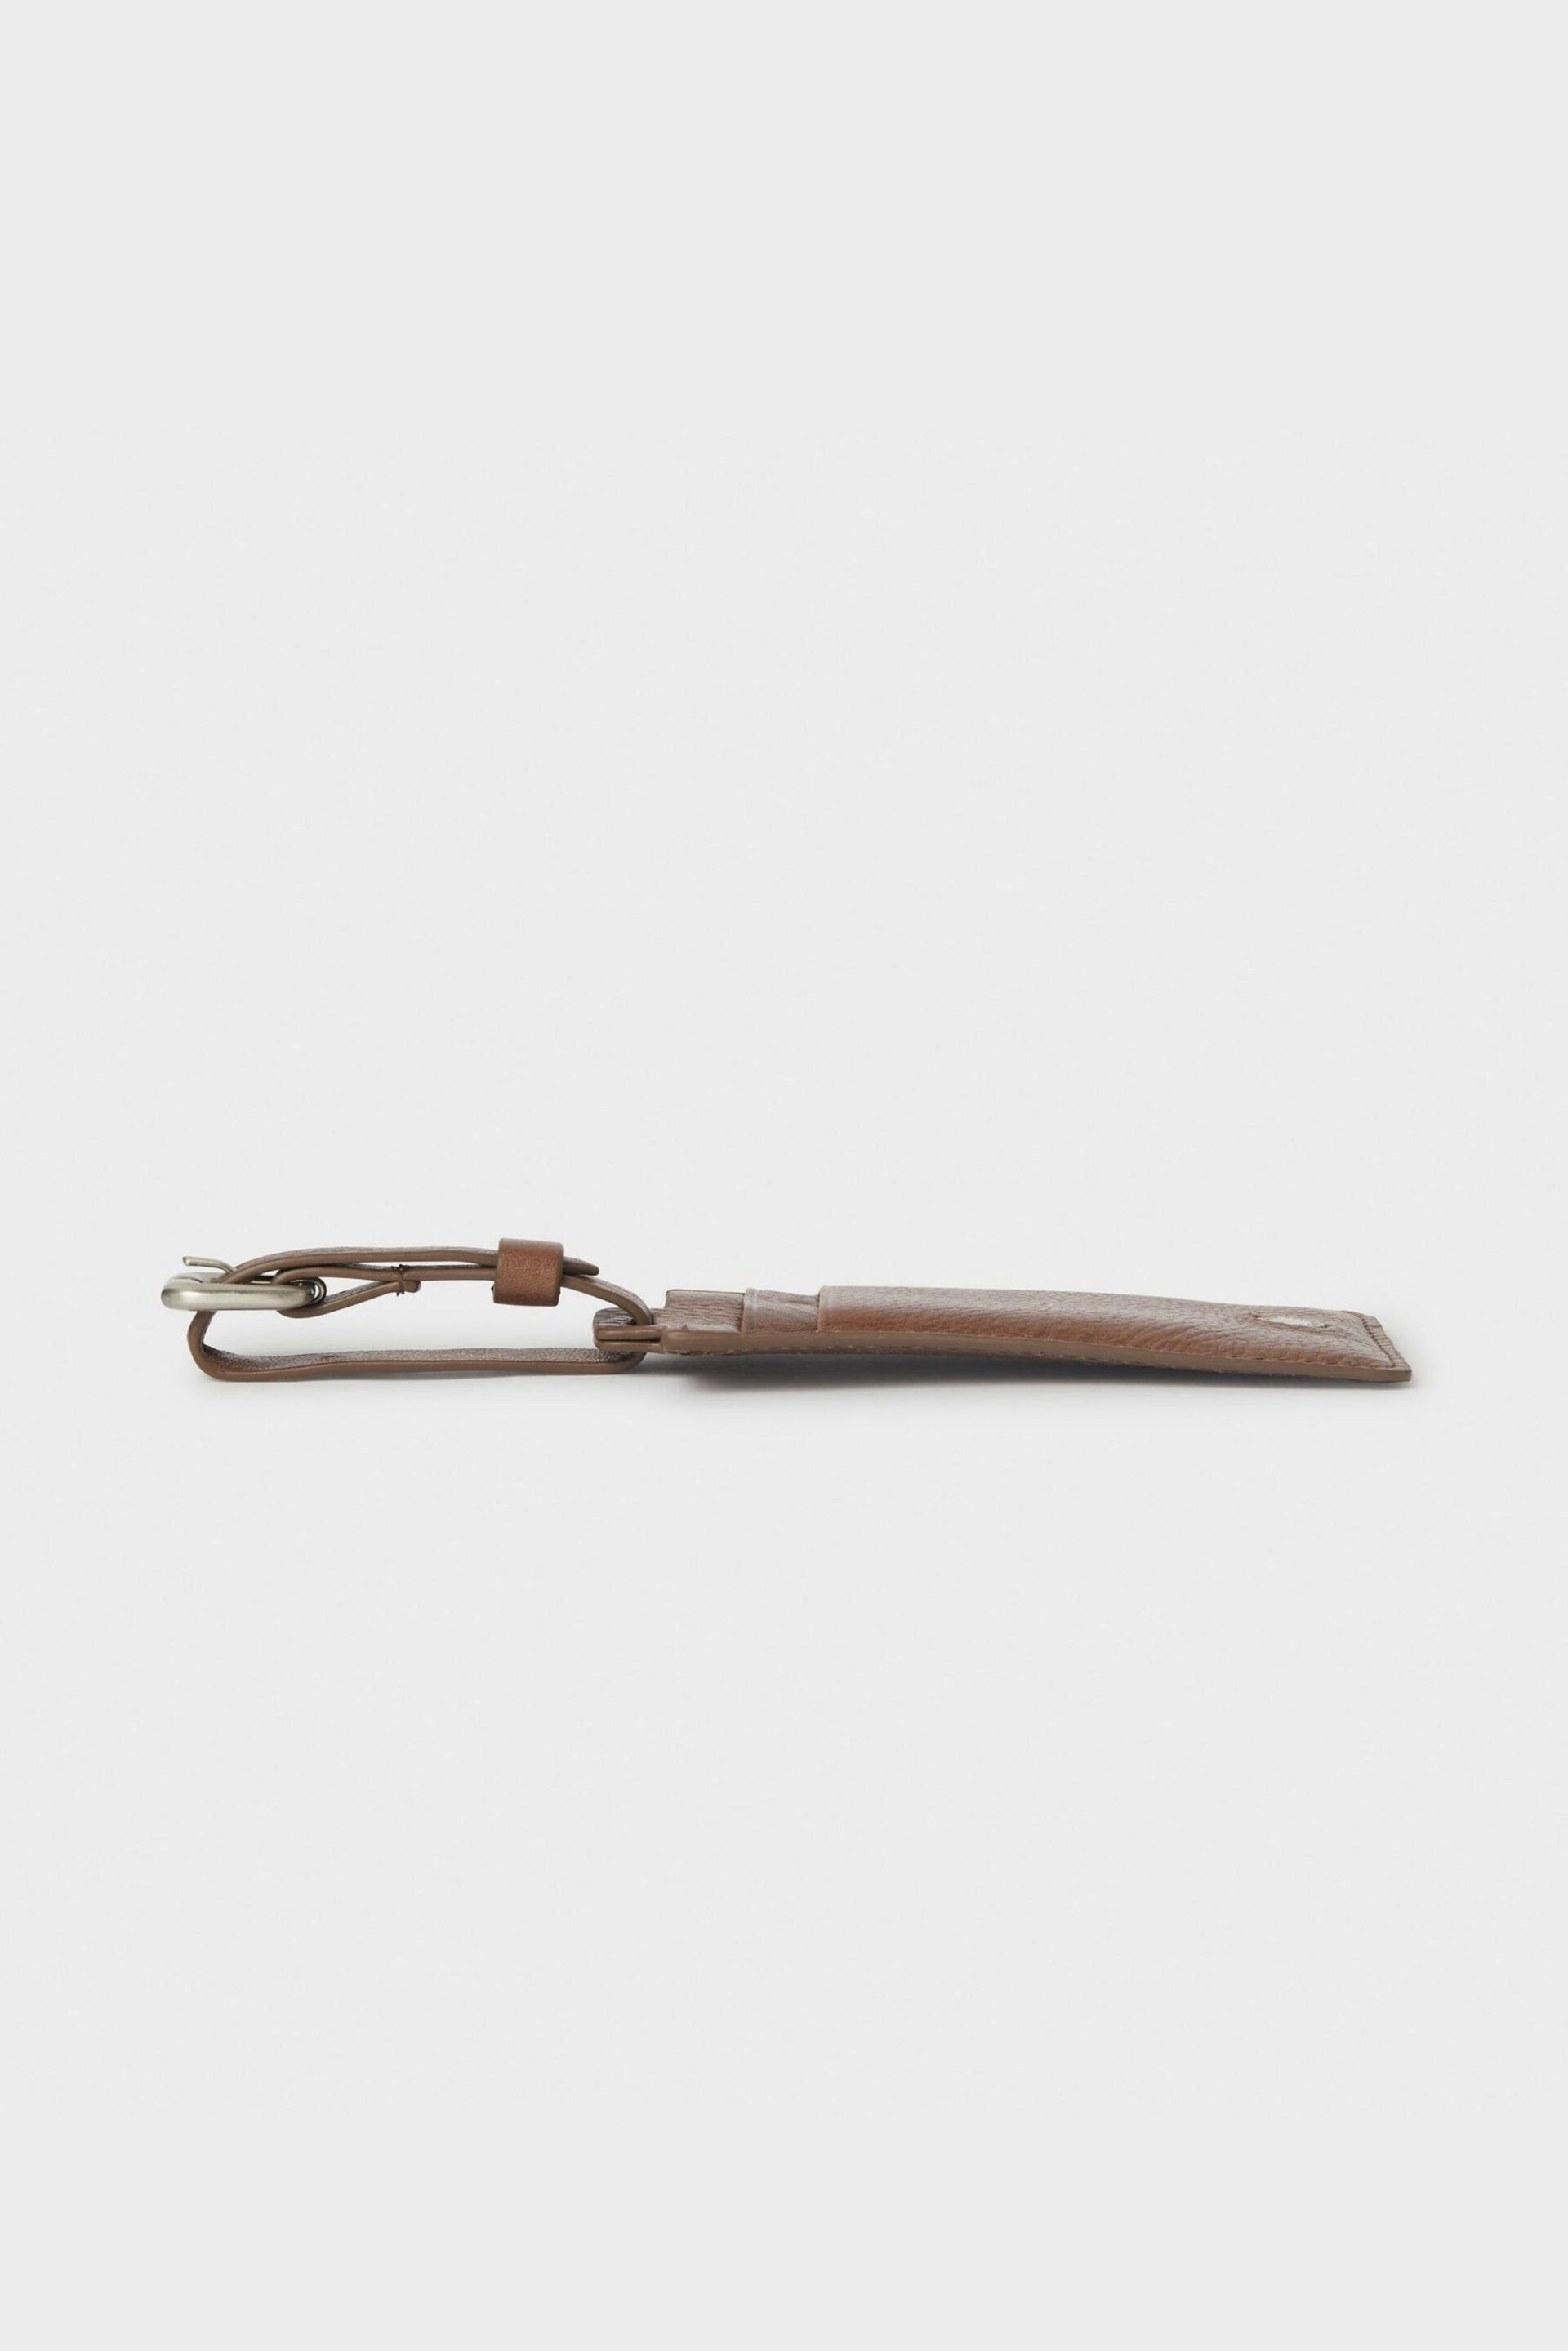 OSPREY LONDON Business Class Leather Luggage Tag - Image 5 of 5